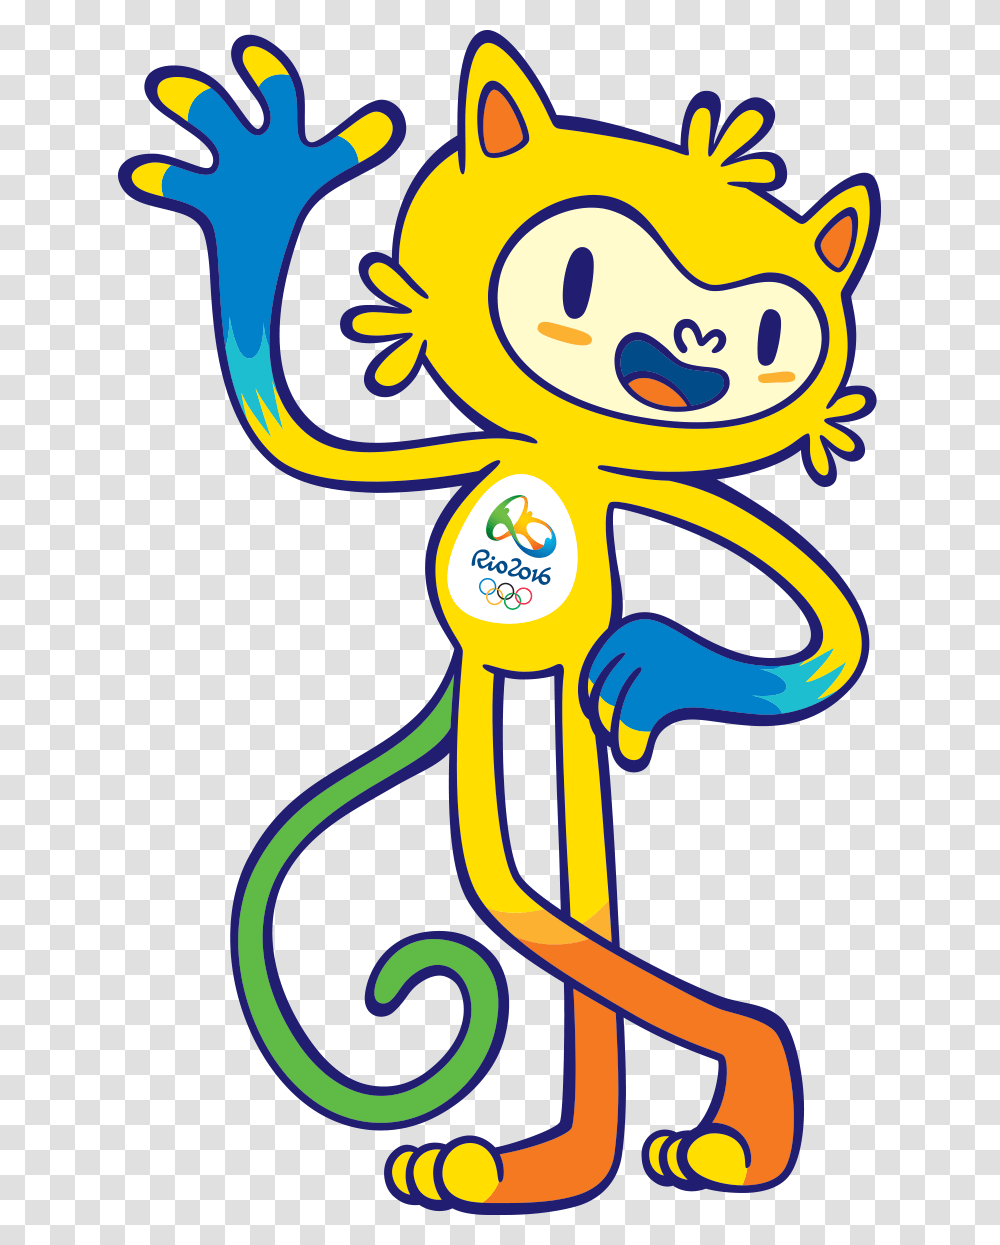 Medals Clipart Rio Olympics 16 Olympic Games Mascot Animal Light Label Transparent Png Pngset Com